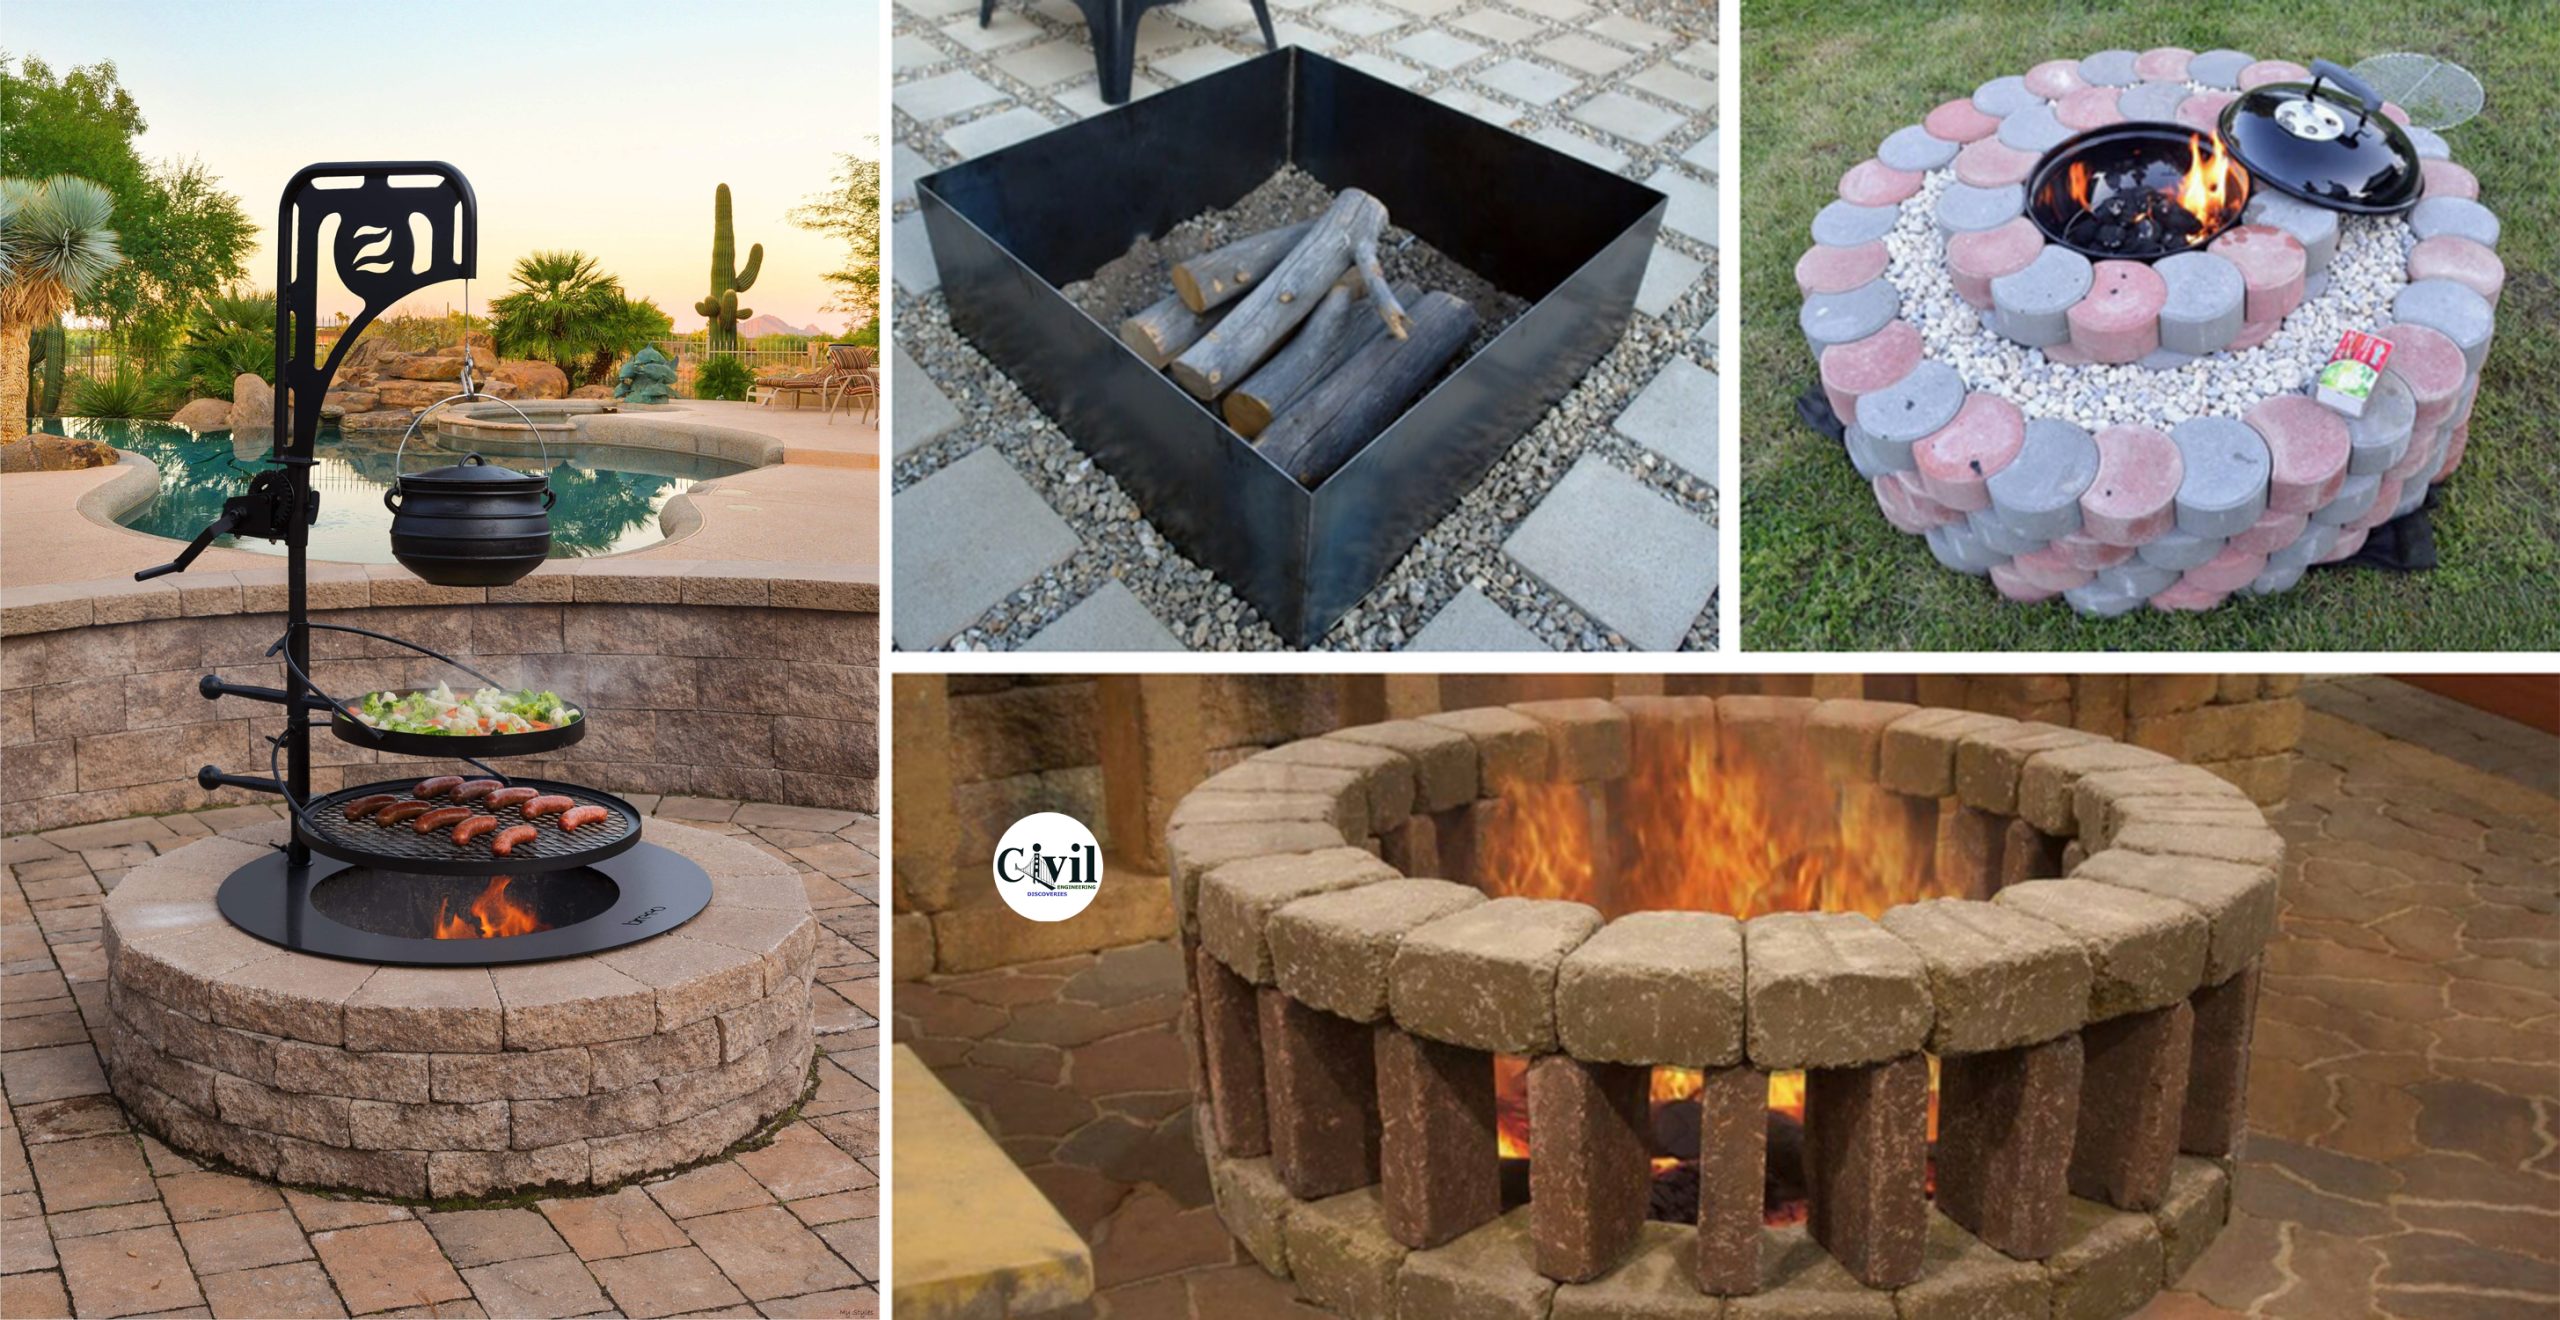 Awesome Diy Fire Pit Ideas For Your, Images Of Homemade Fire Pits